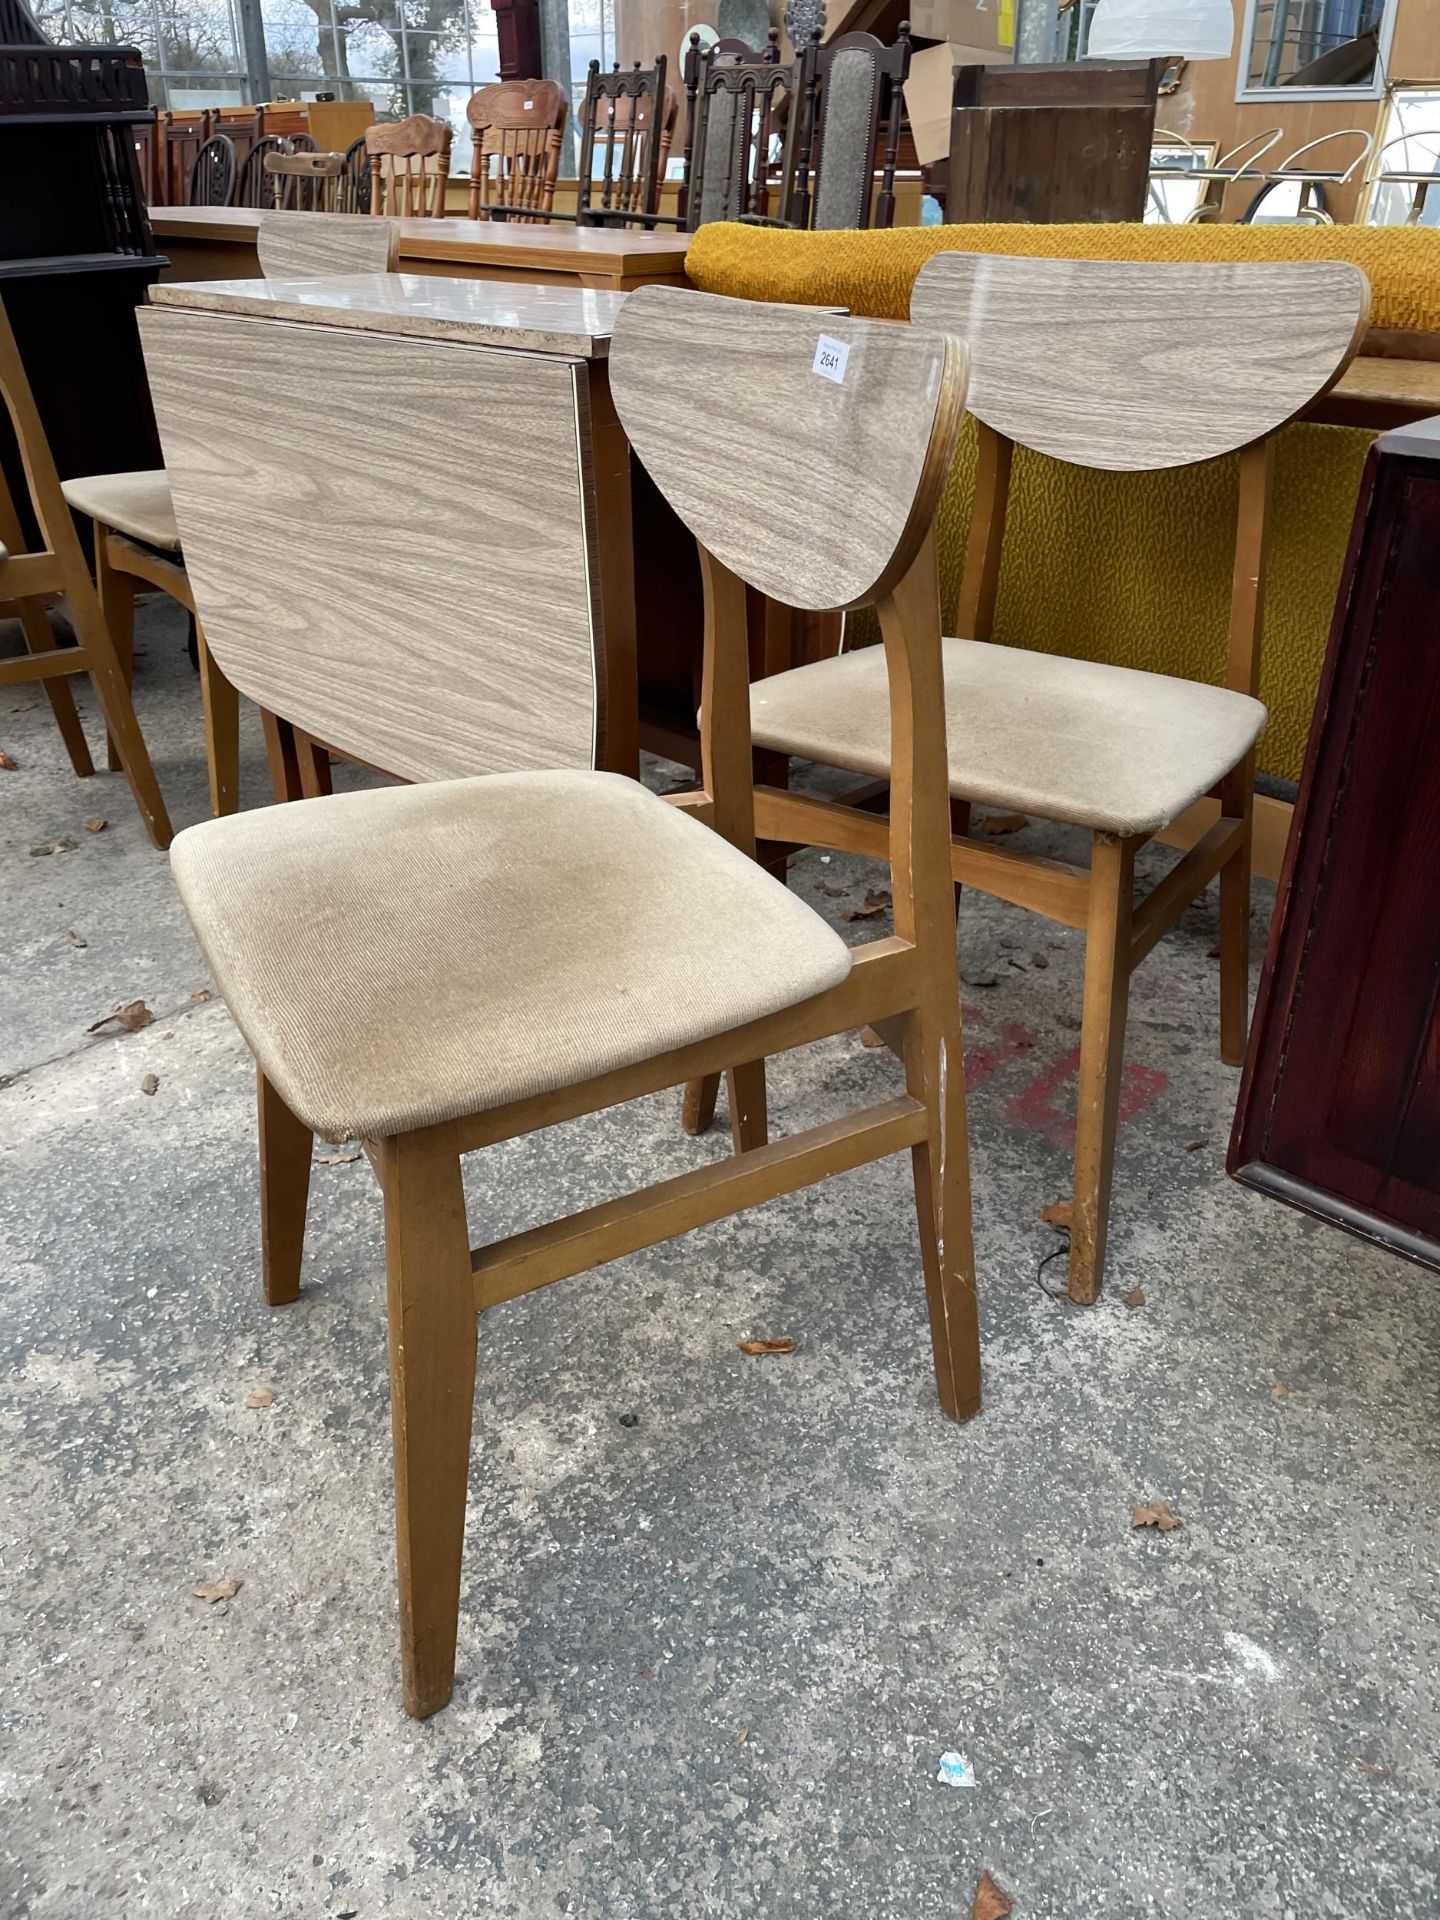 A RETRO FORMICA TOP DROP-LEAF KITCHEN TABLE AND FOUR MATCHING CHAIRS - Image 2 of 3